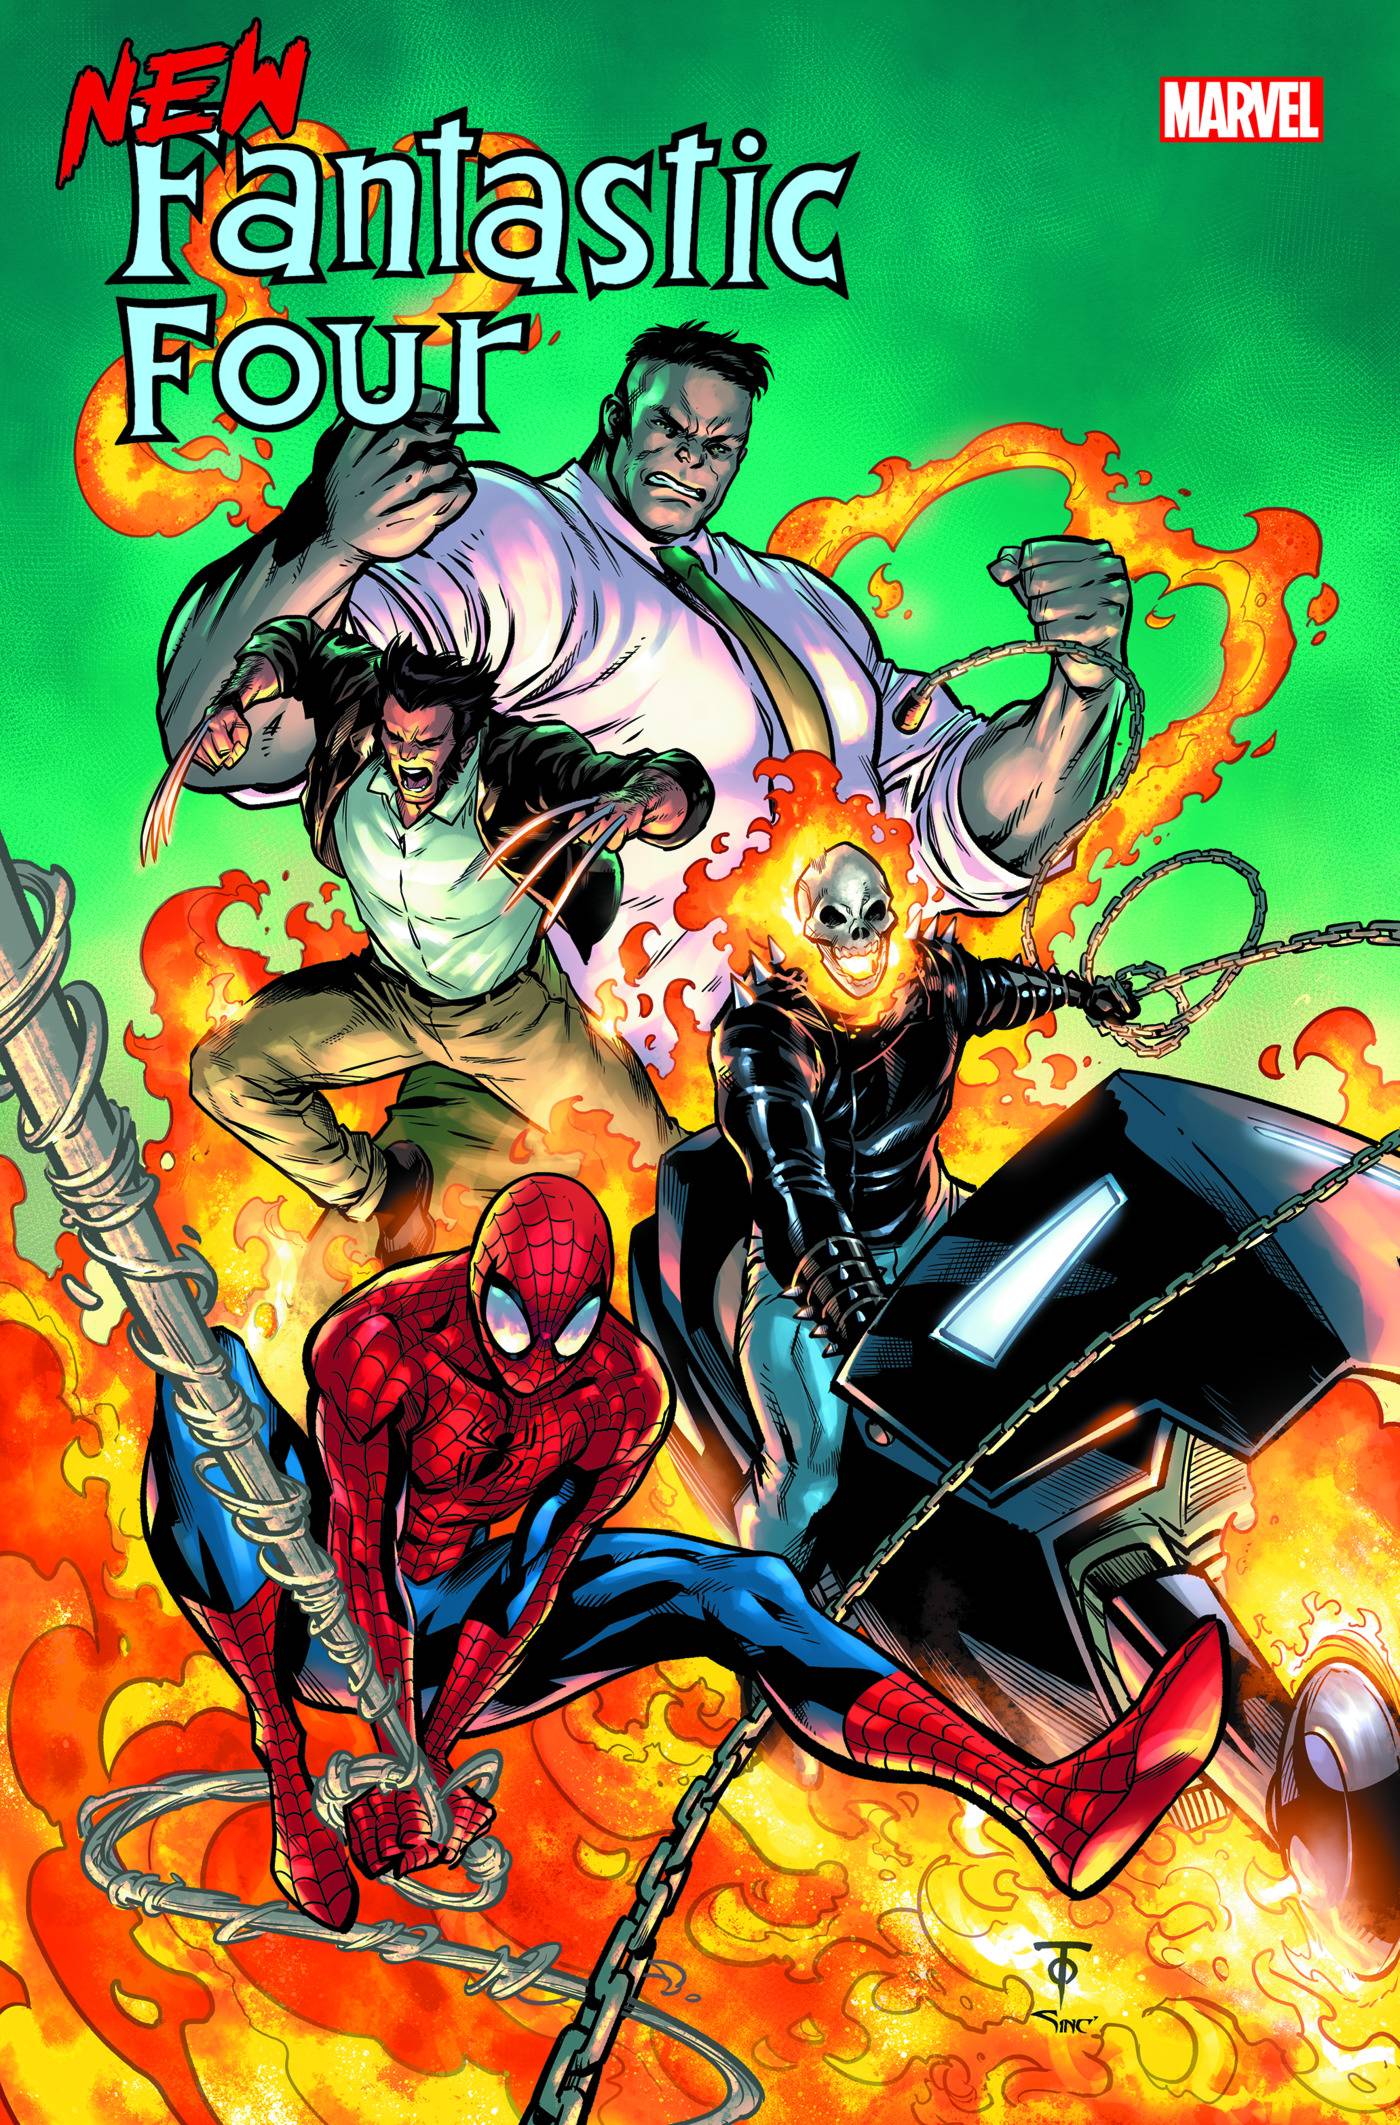 NEW FANTASTIC FOUR #3 (OF 5) TO VAR